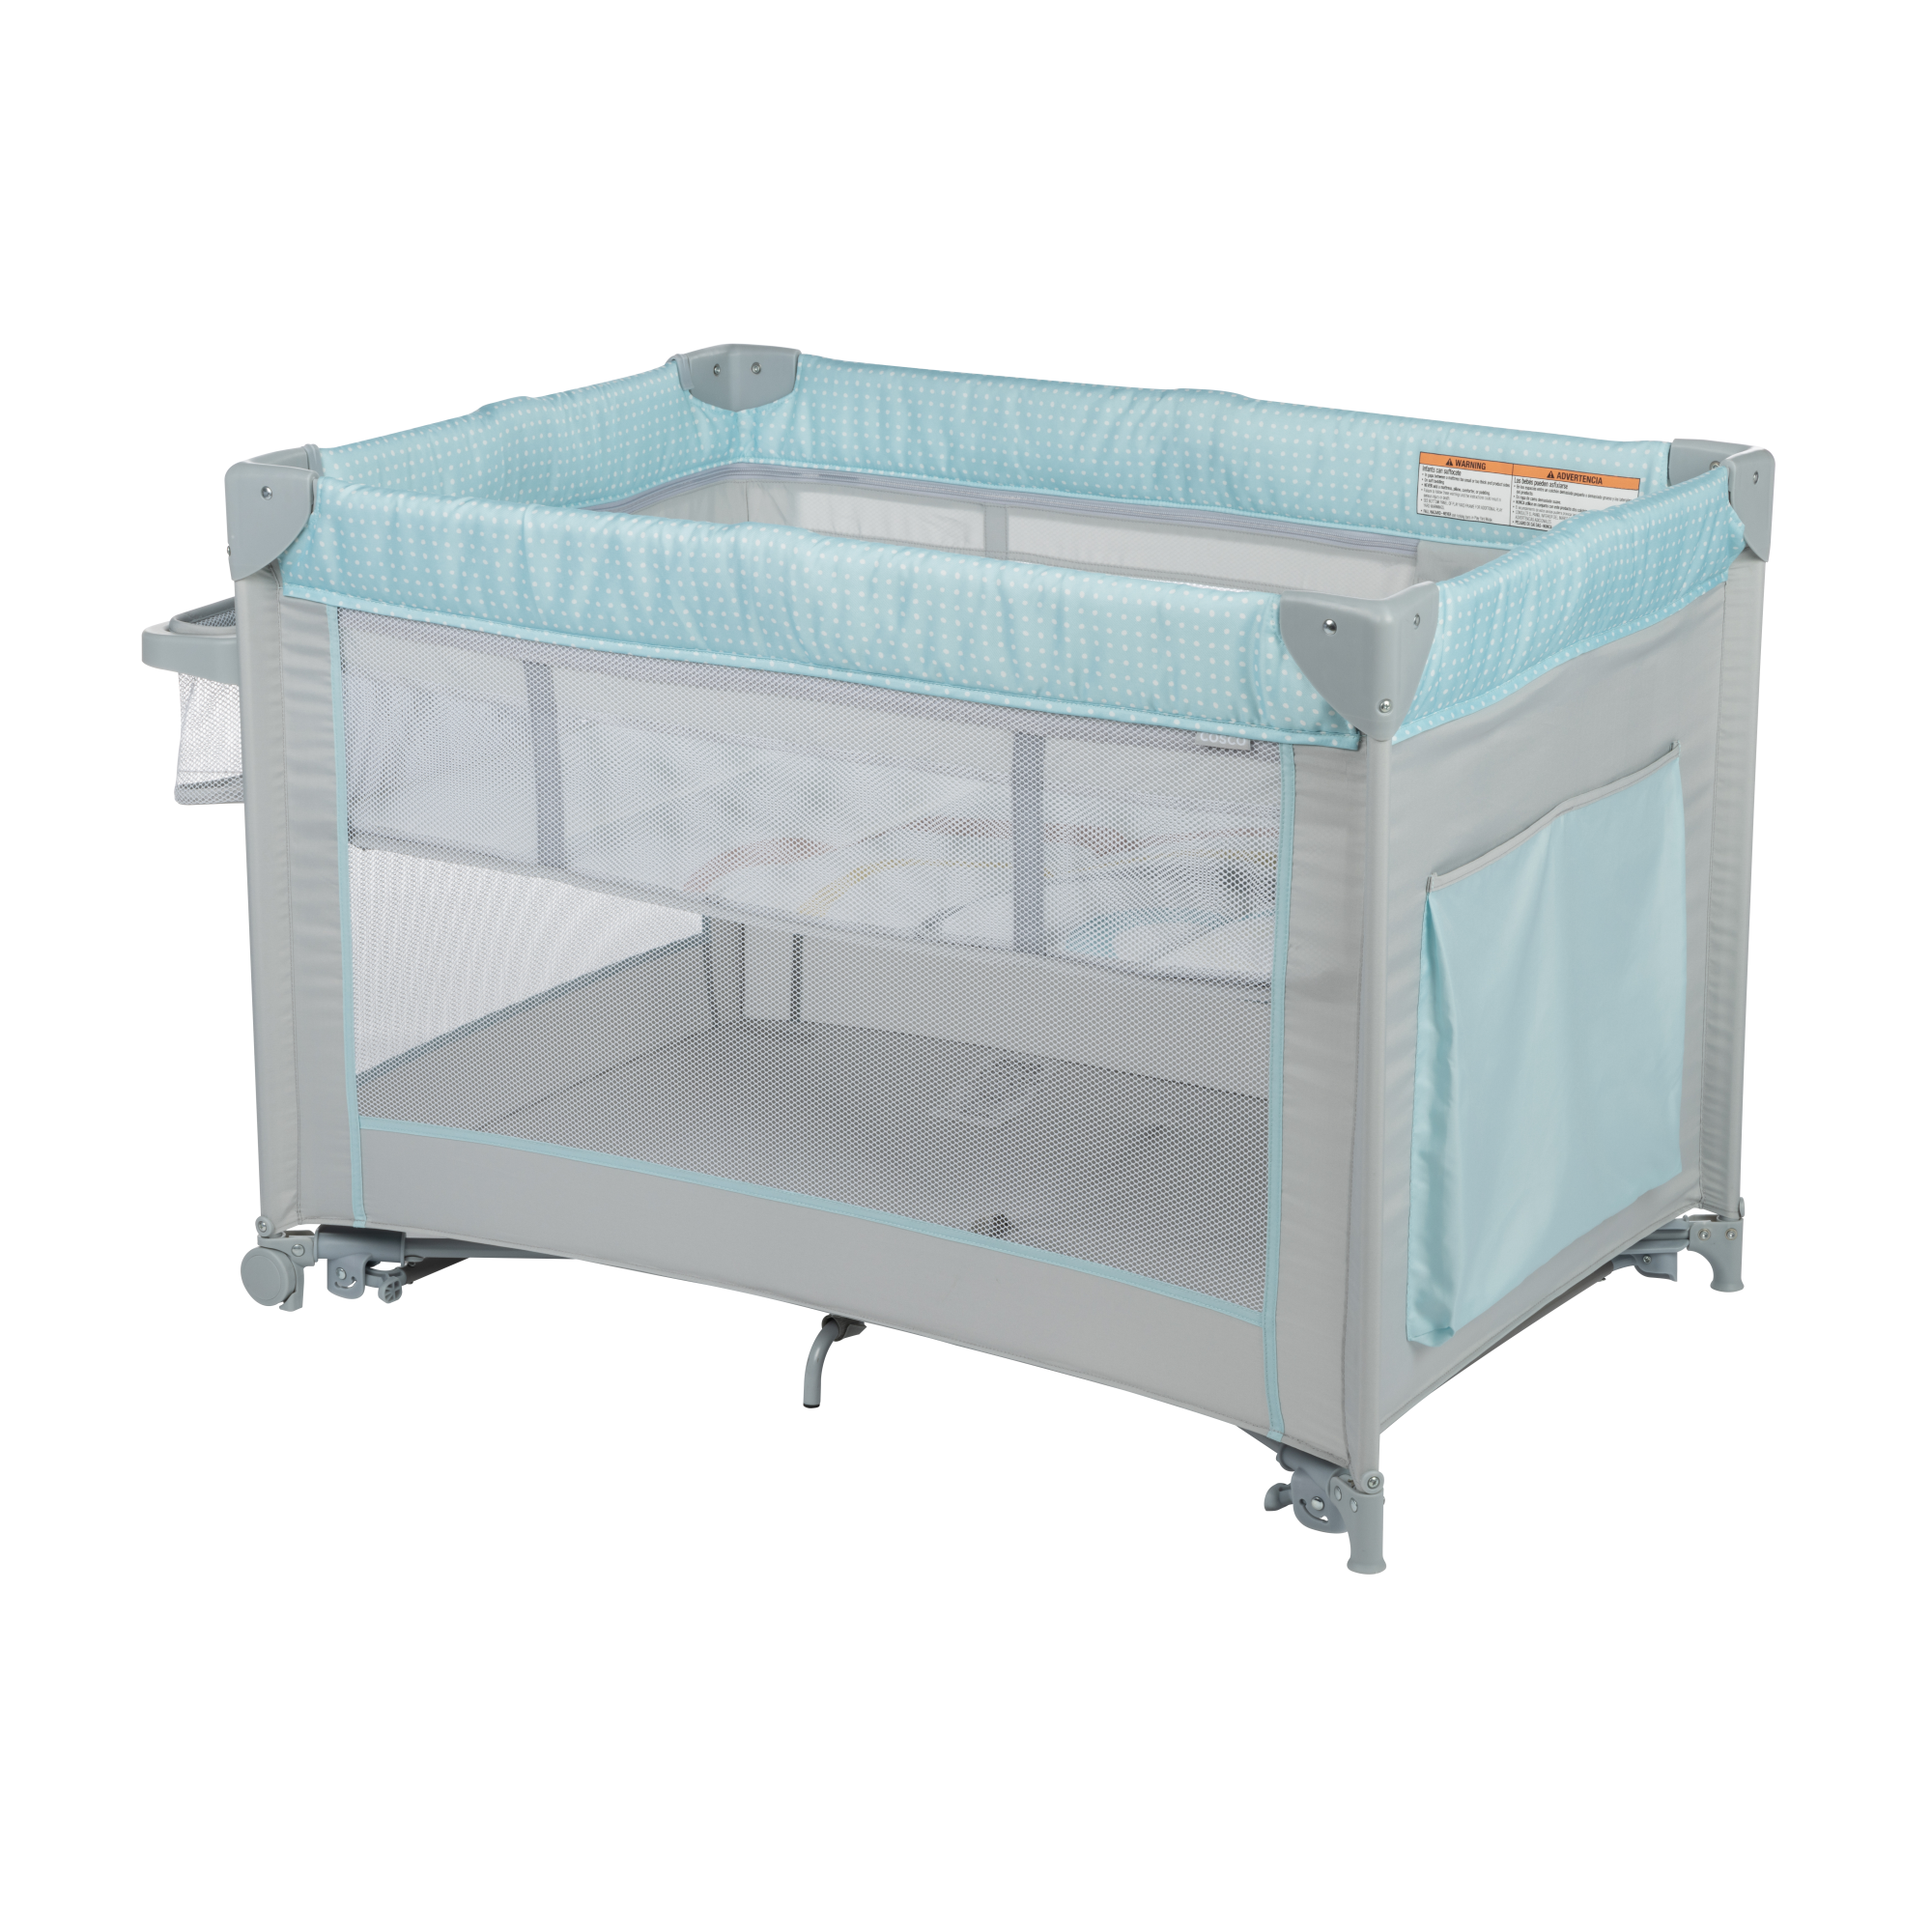 CoscoKids Rocking Bassinet with Play Yard DLX - Rainbow - 45 degree angle view of left side